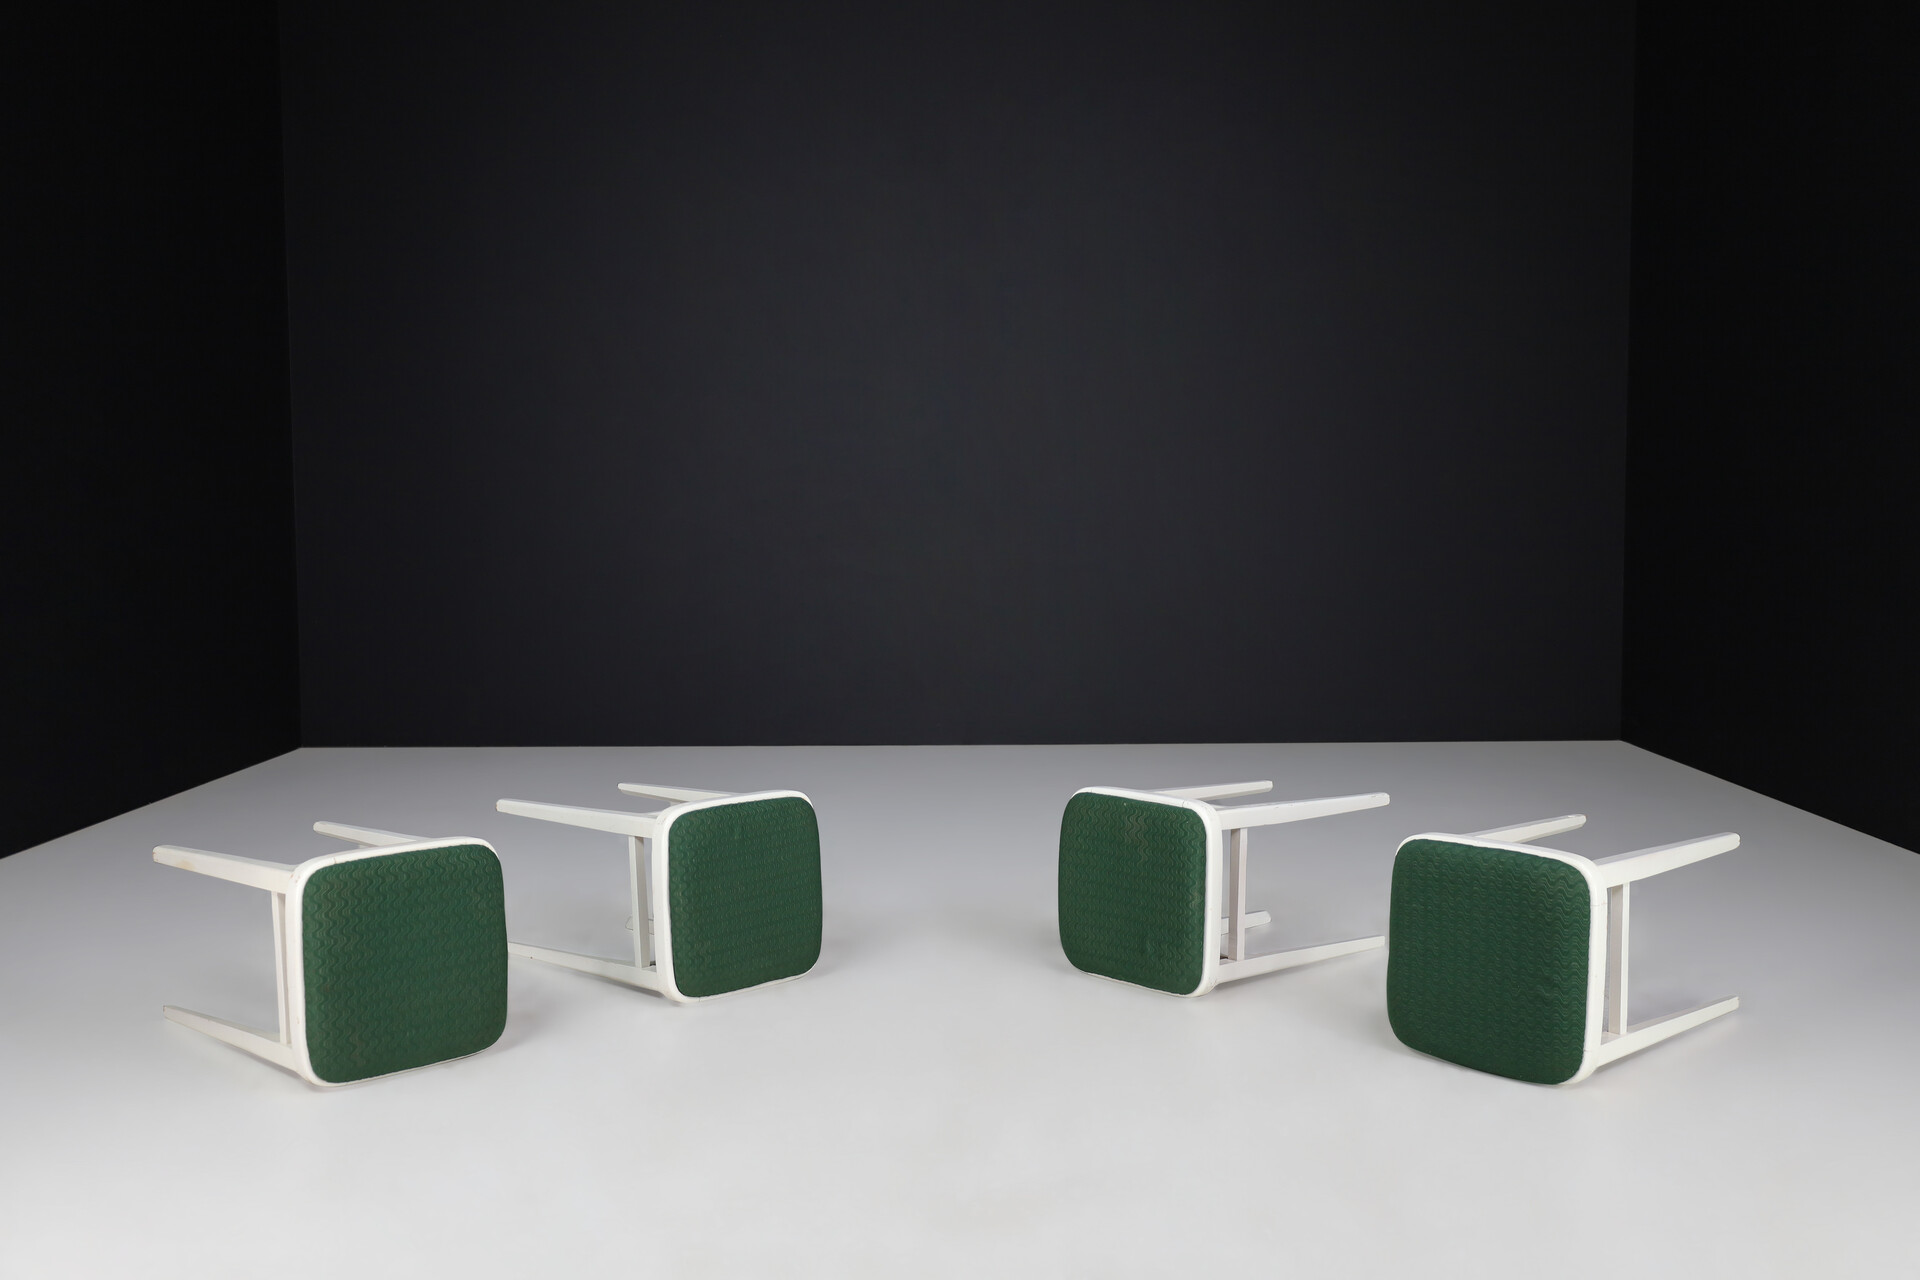 Mid century modern Painted wood and green upholstery stools, Vienna 1950s Mid-20th century